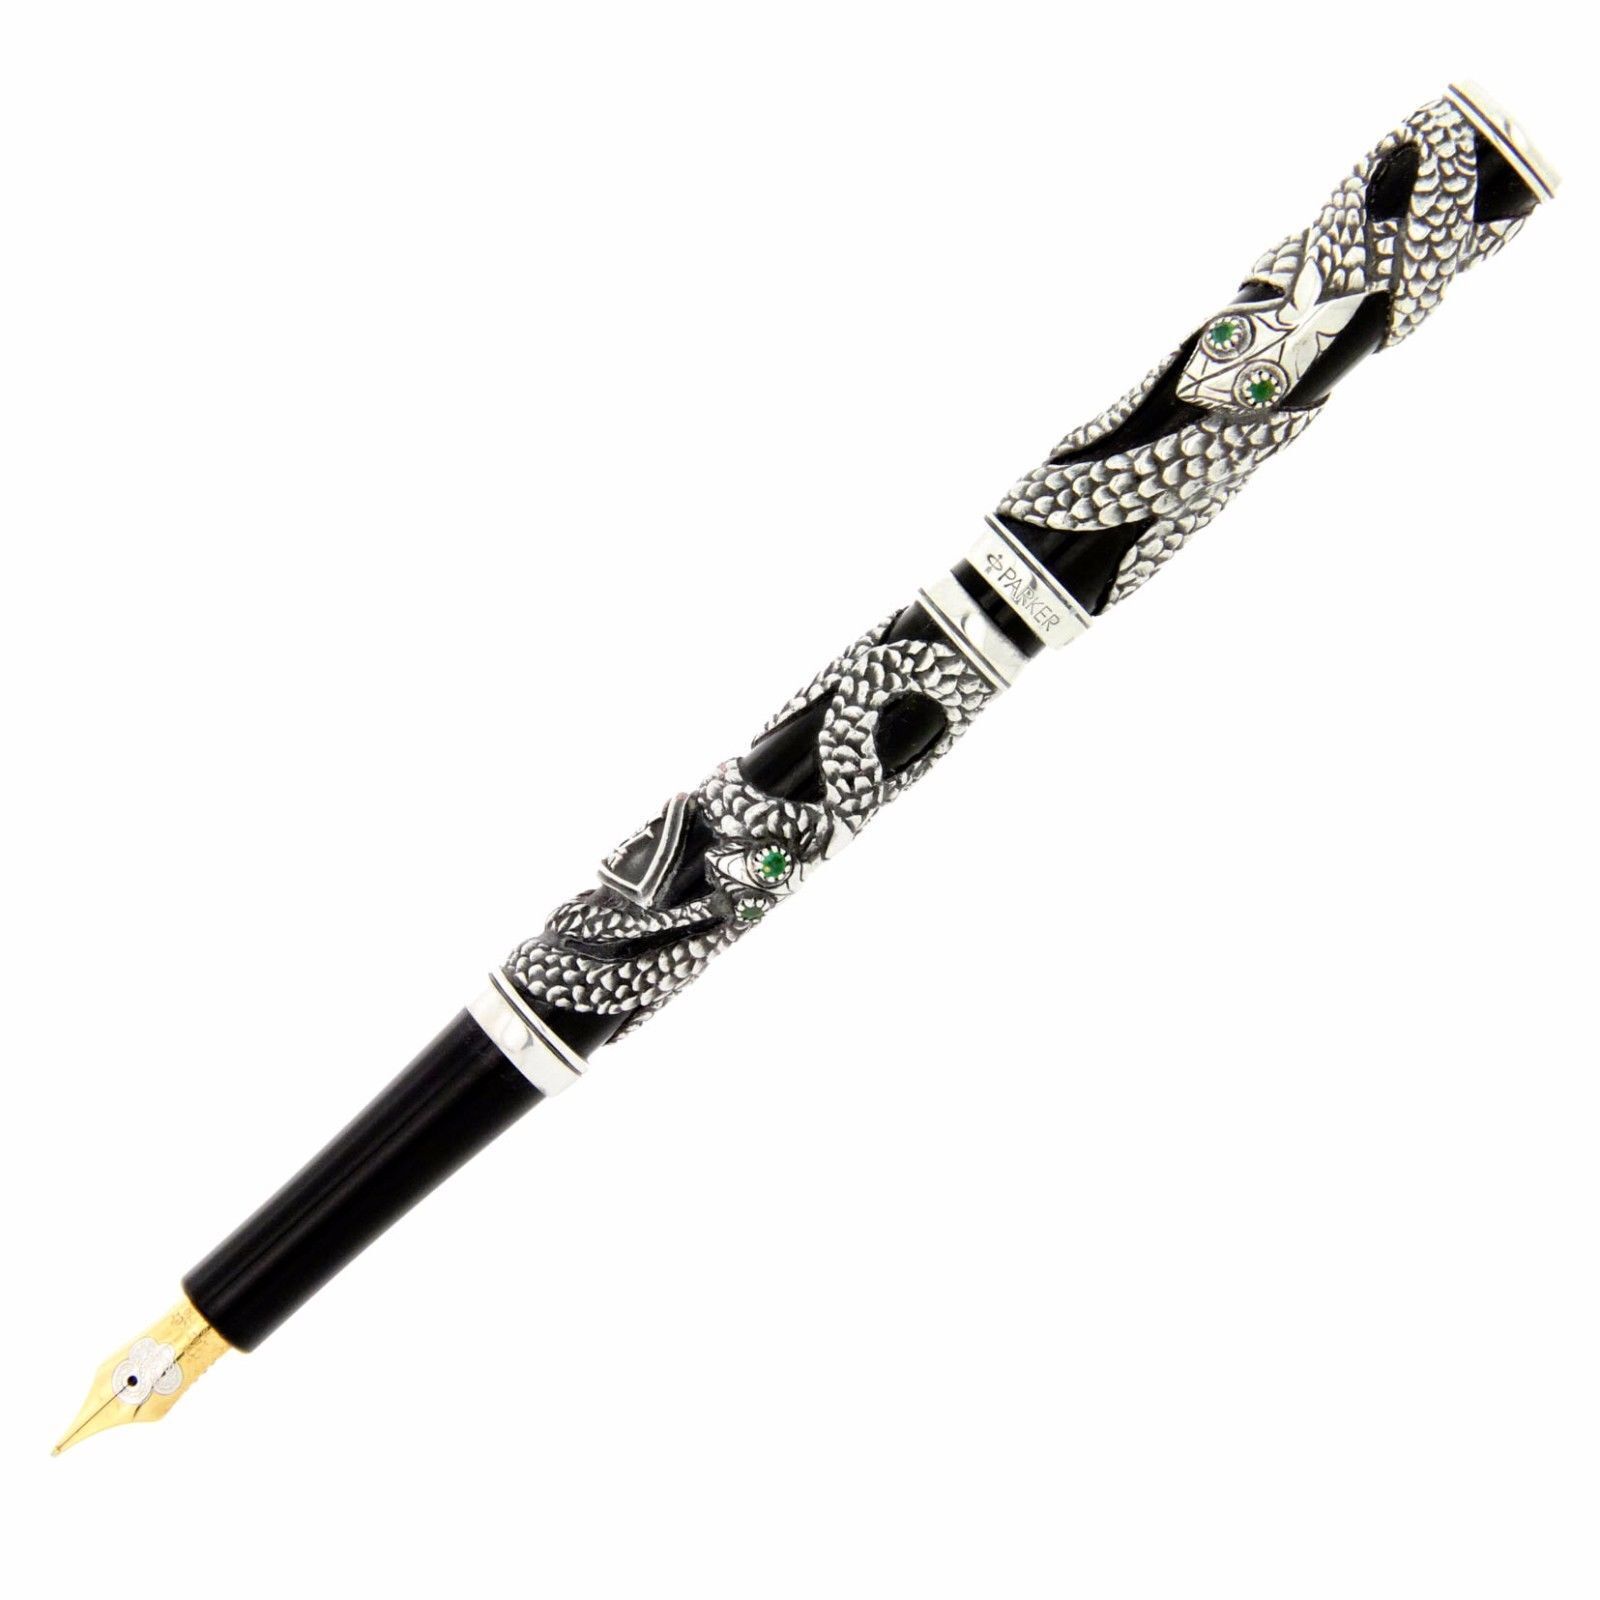 PARKER DUOFOLD  LIMITED EDITION STERLING SILVER SNAKE FOUNTAIN  PEN NEW IN BOX  